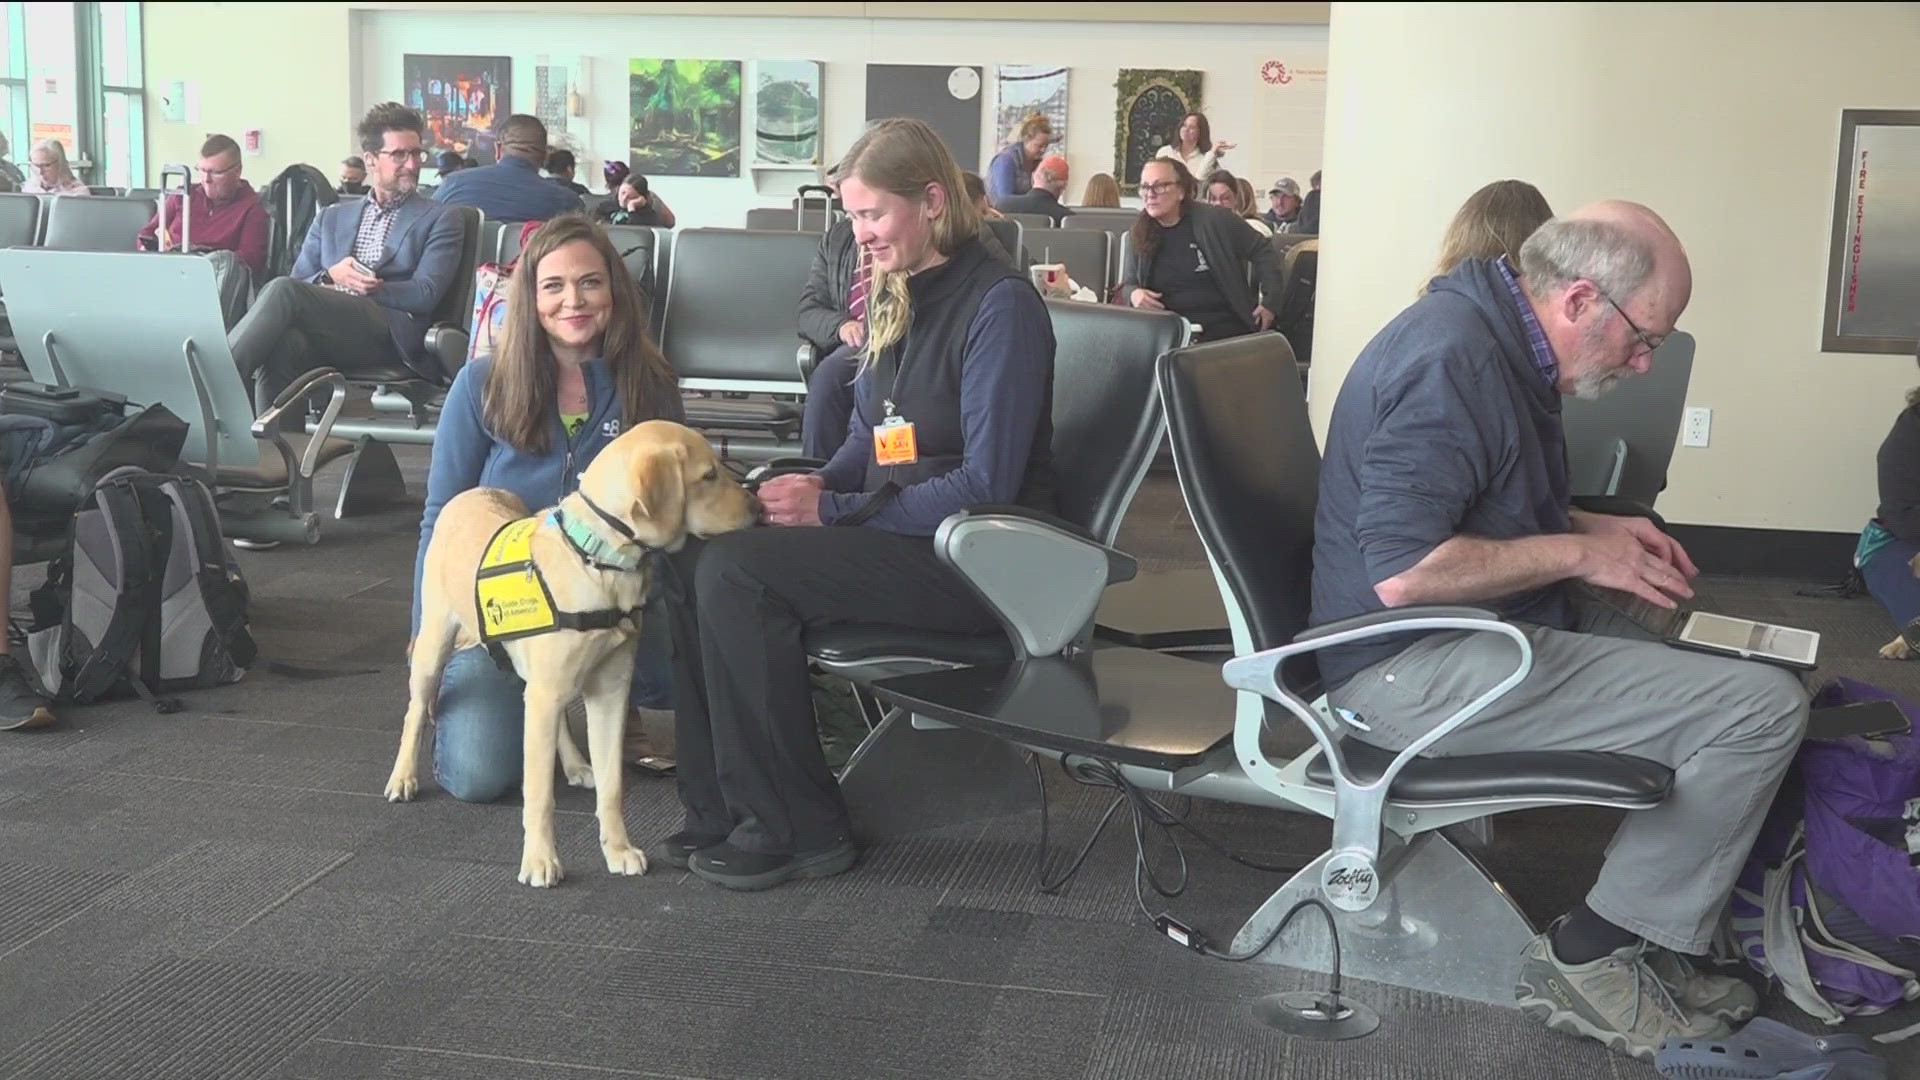 Guide dogs must undergo rigorous training to learn to stay on task, and the airport, which is full of distractions, is a great place to teach a dog how to focus.